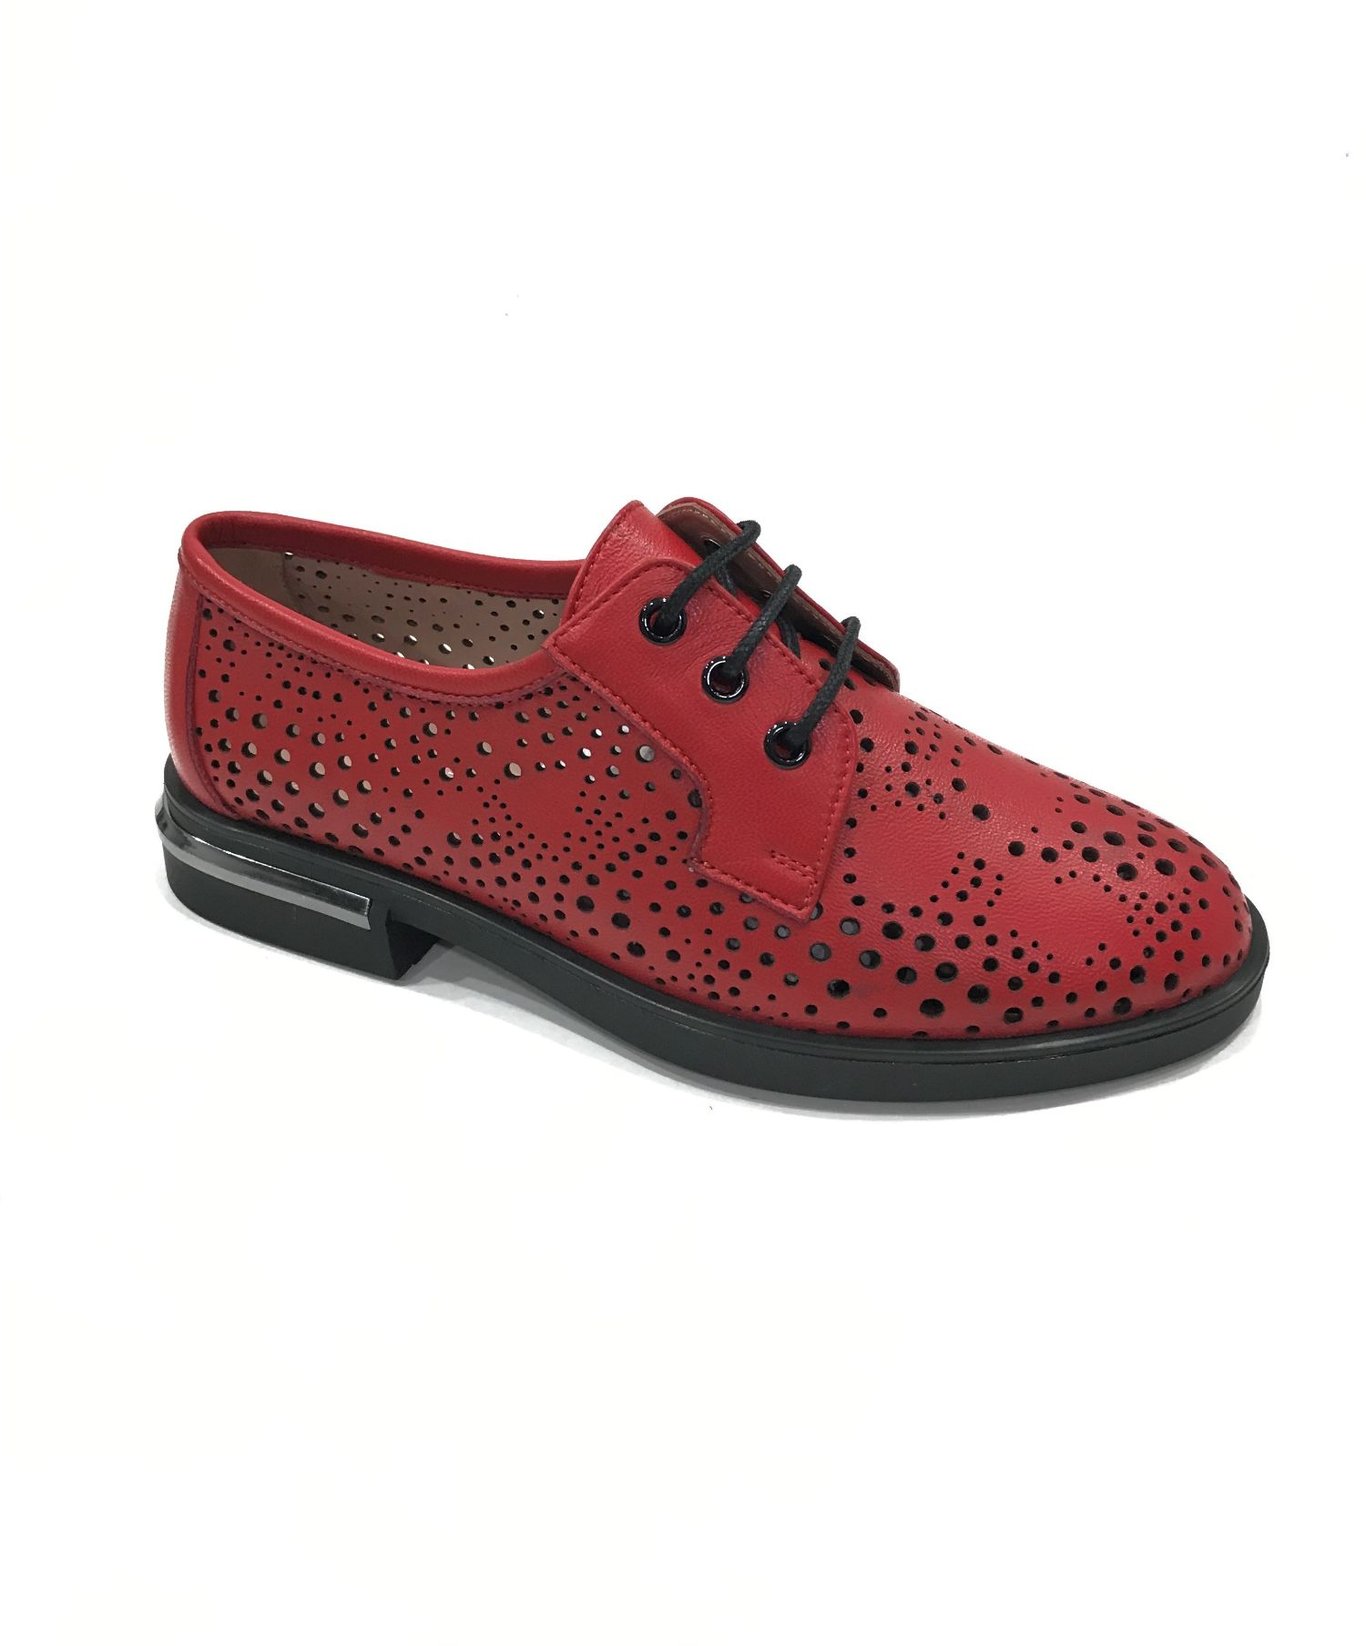 shoes with perforations on ready sole